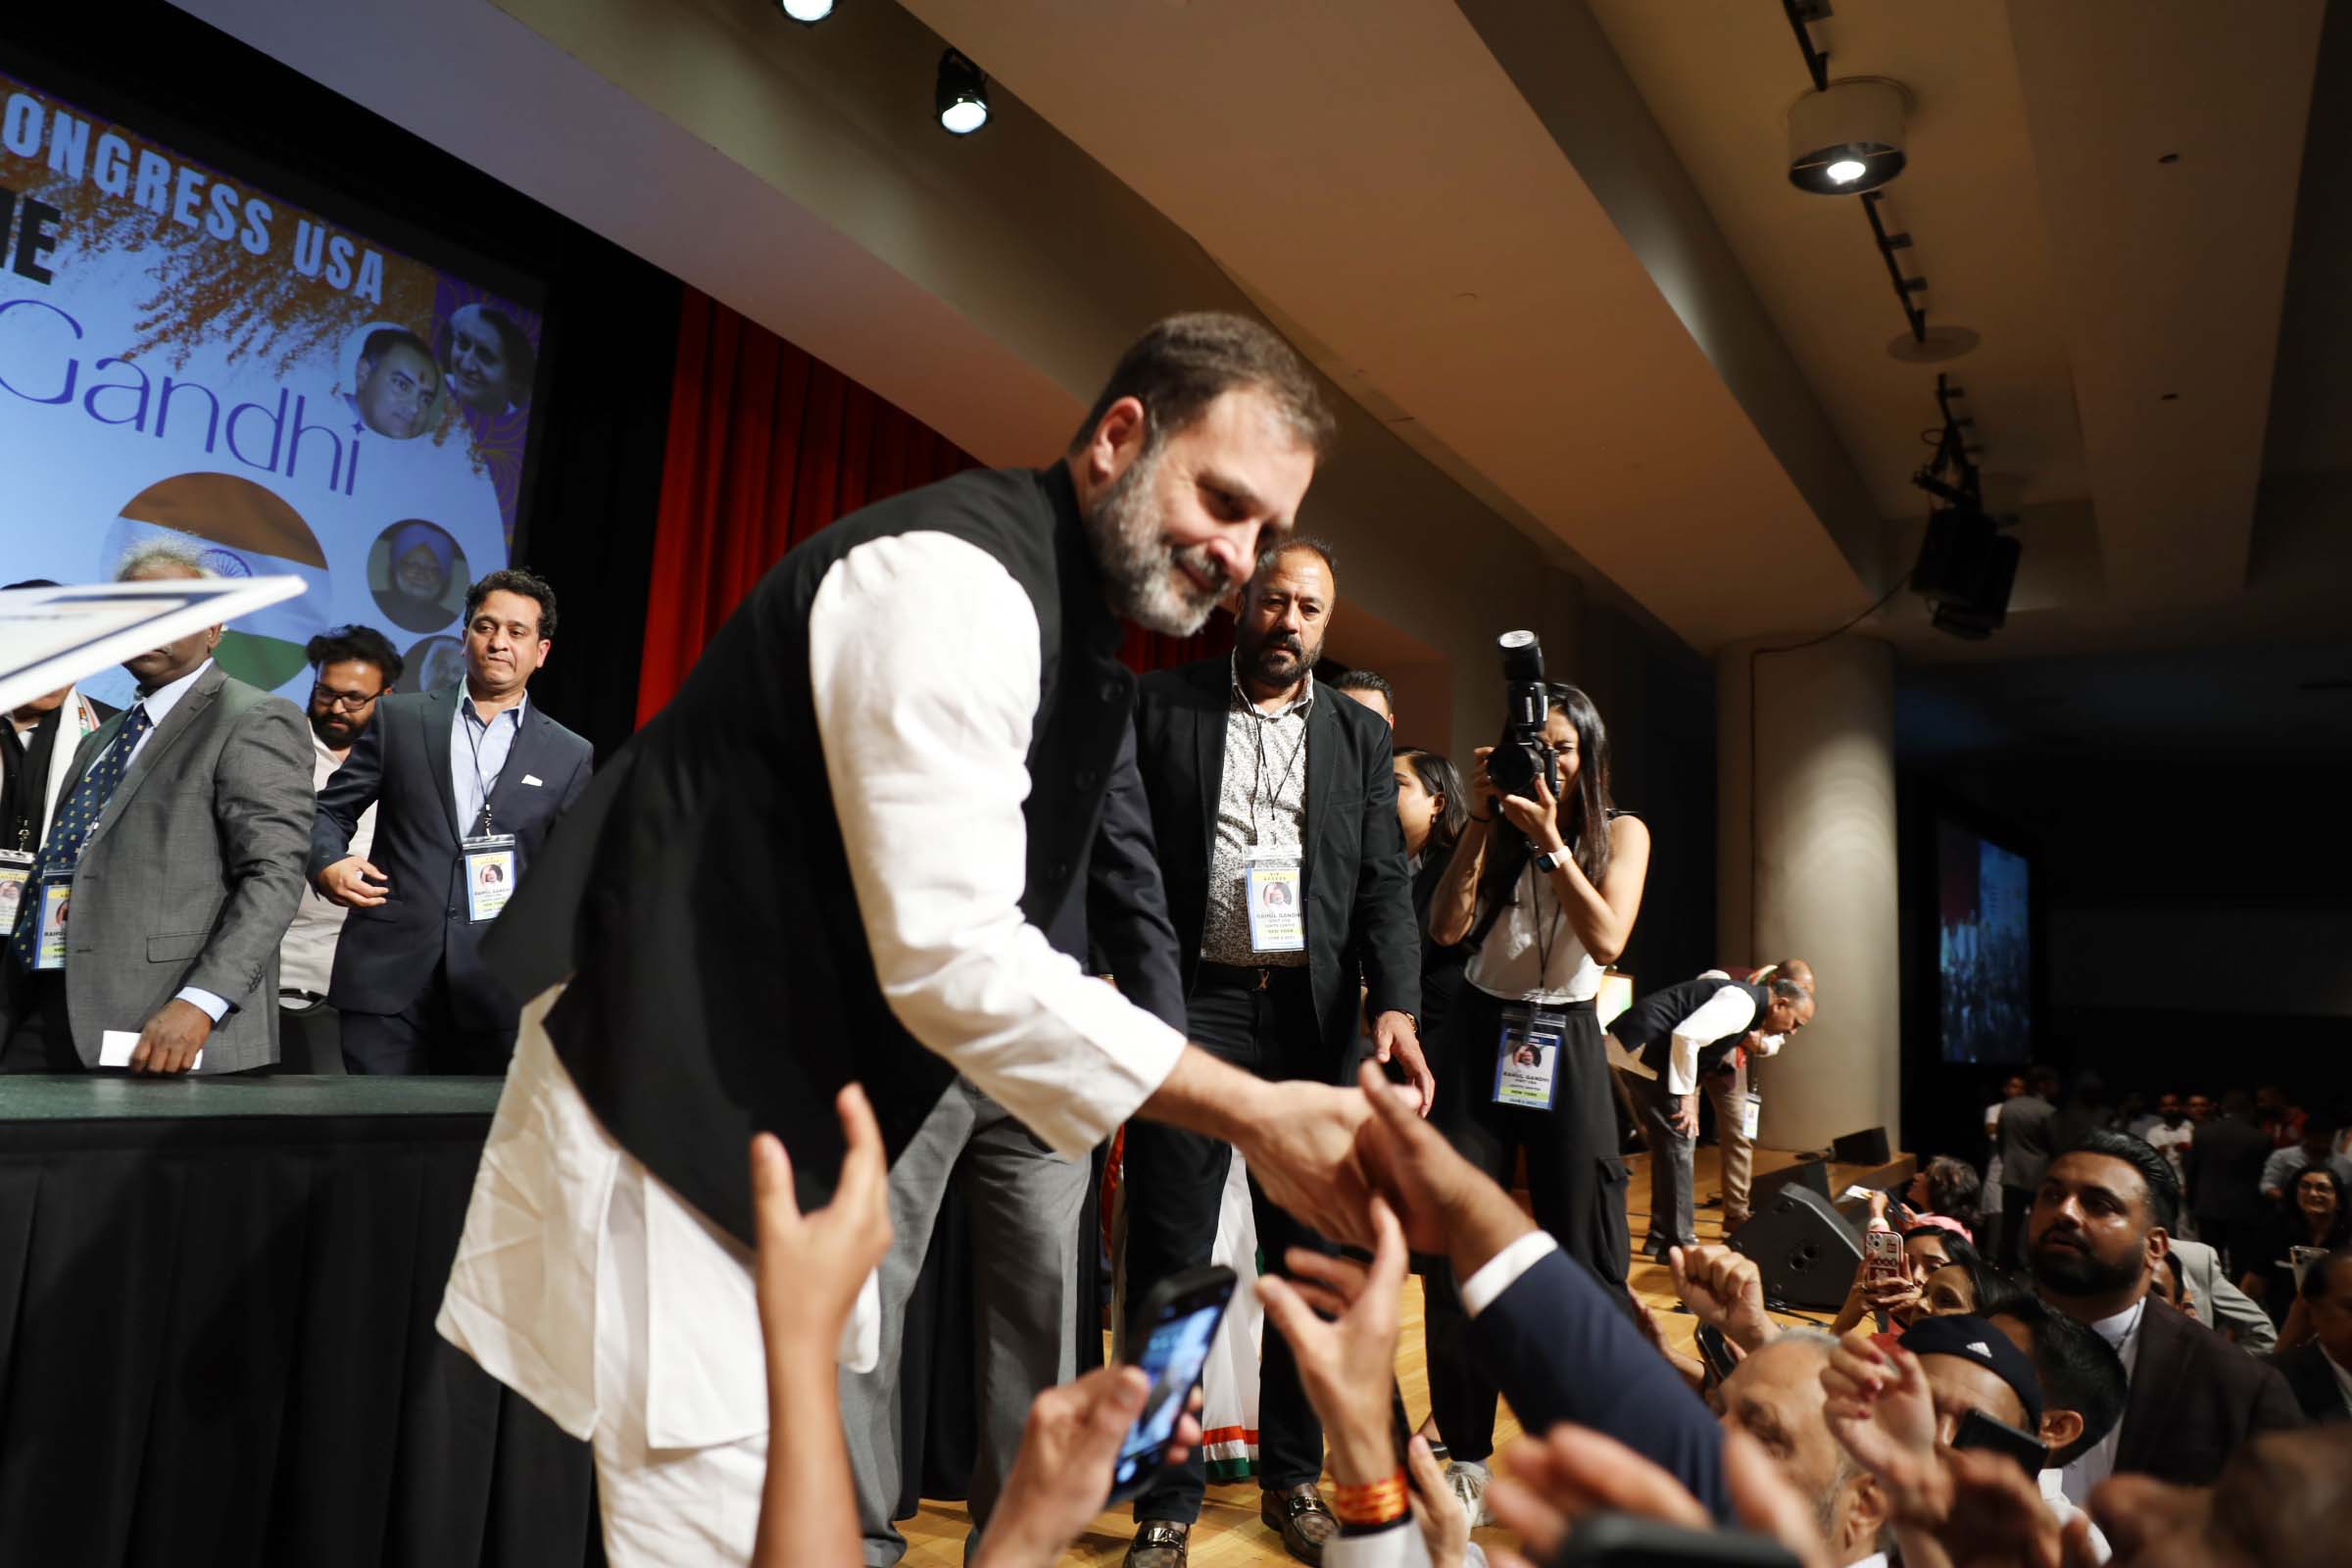 “A modern India with love and affection, not with anger and hatred,” Rahul Gandhi’s vision of India ahead